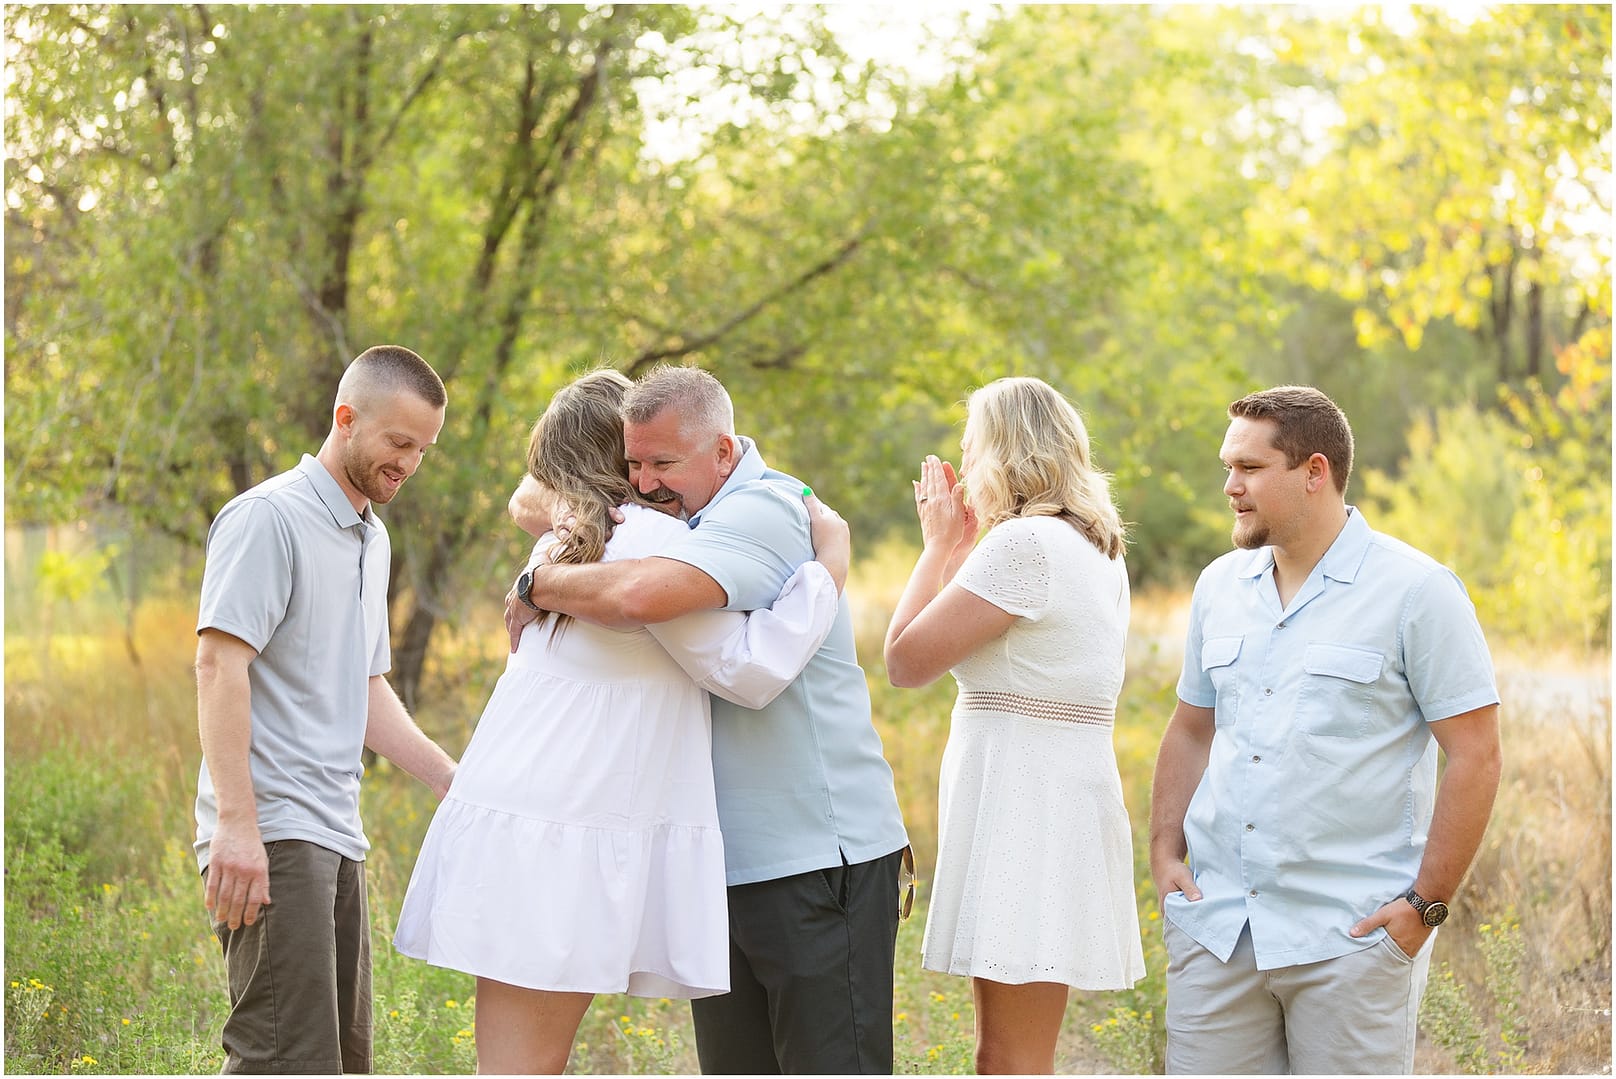 Dad embraces daughter after finding out he is going to be a grandpa. Photo by Tiffany Hix Photography.